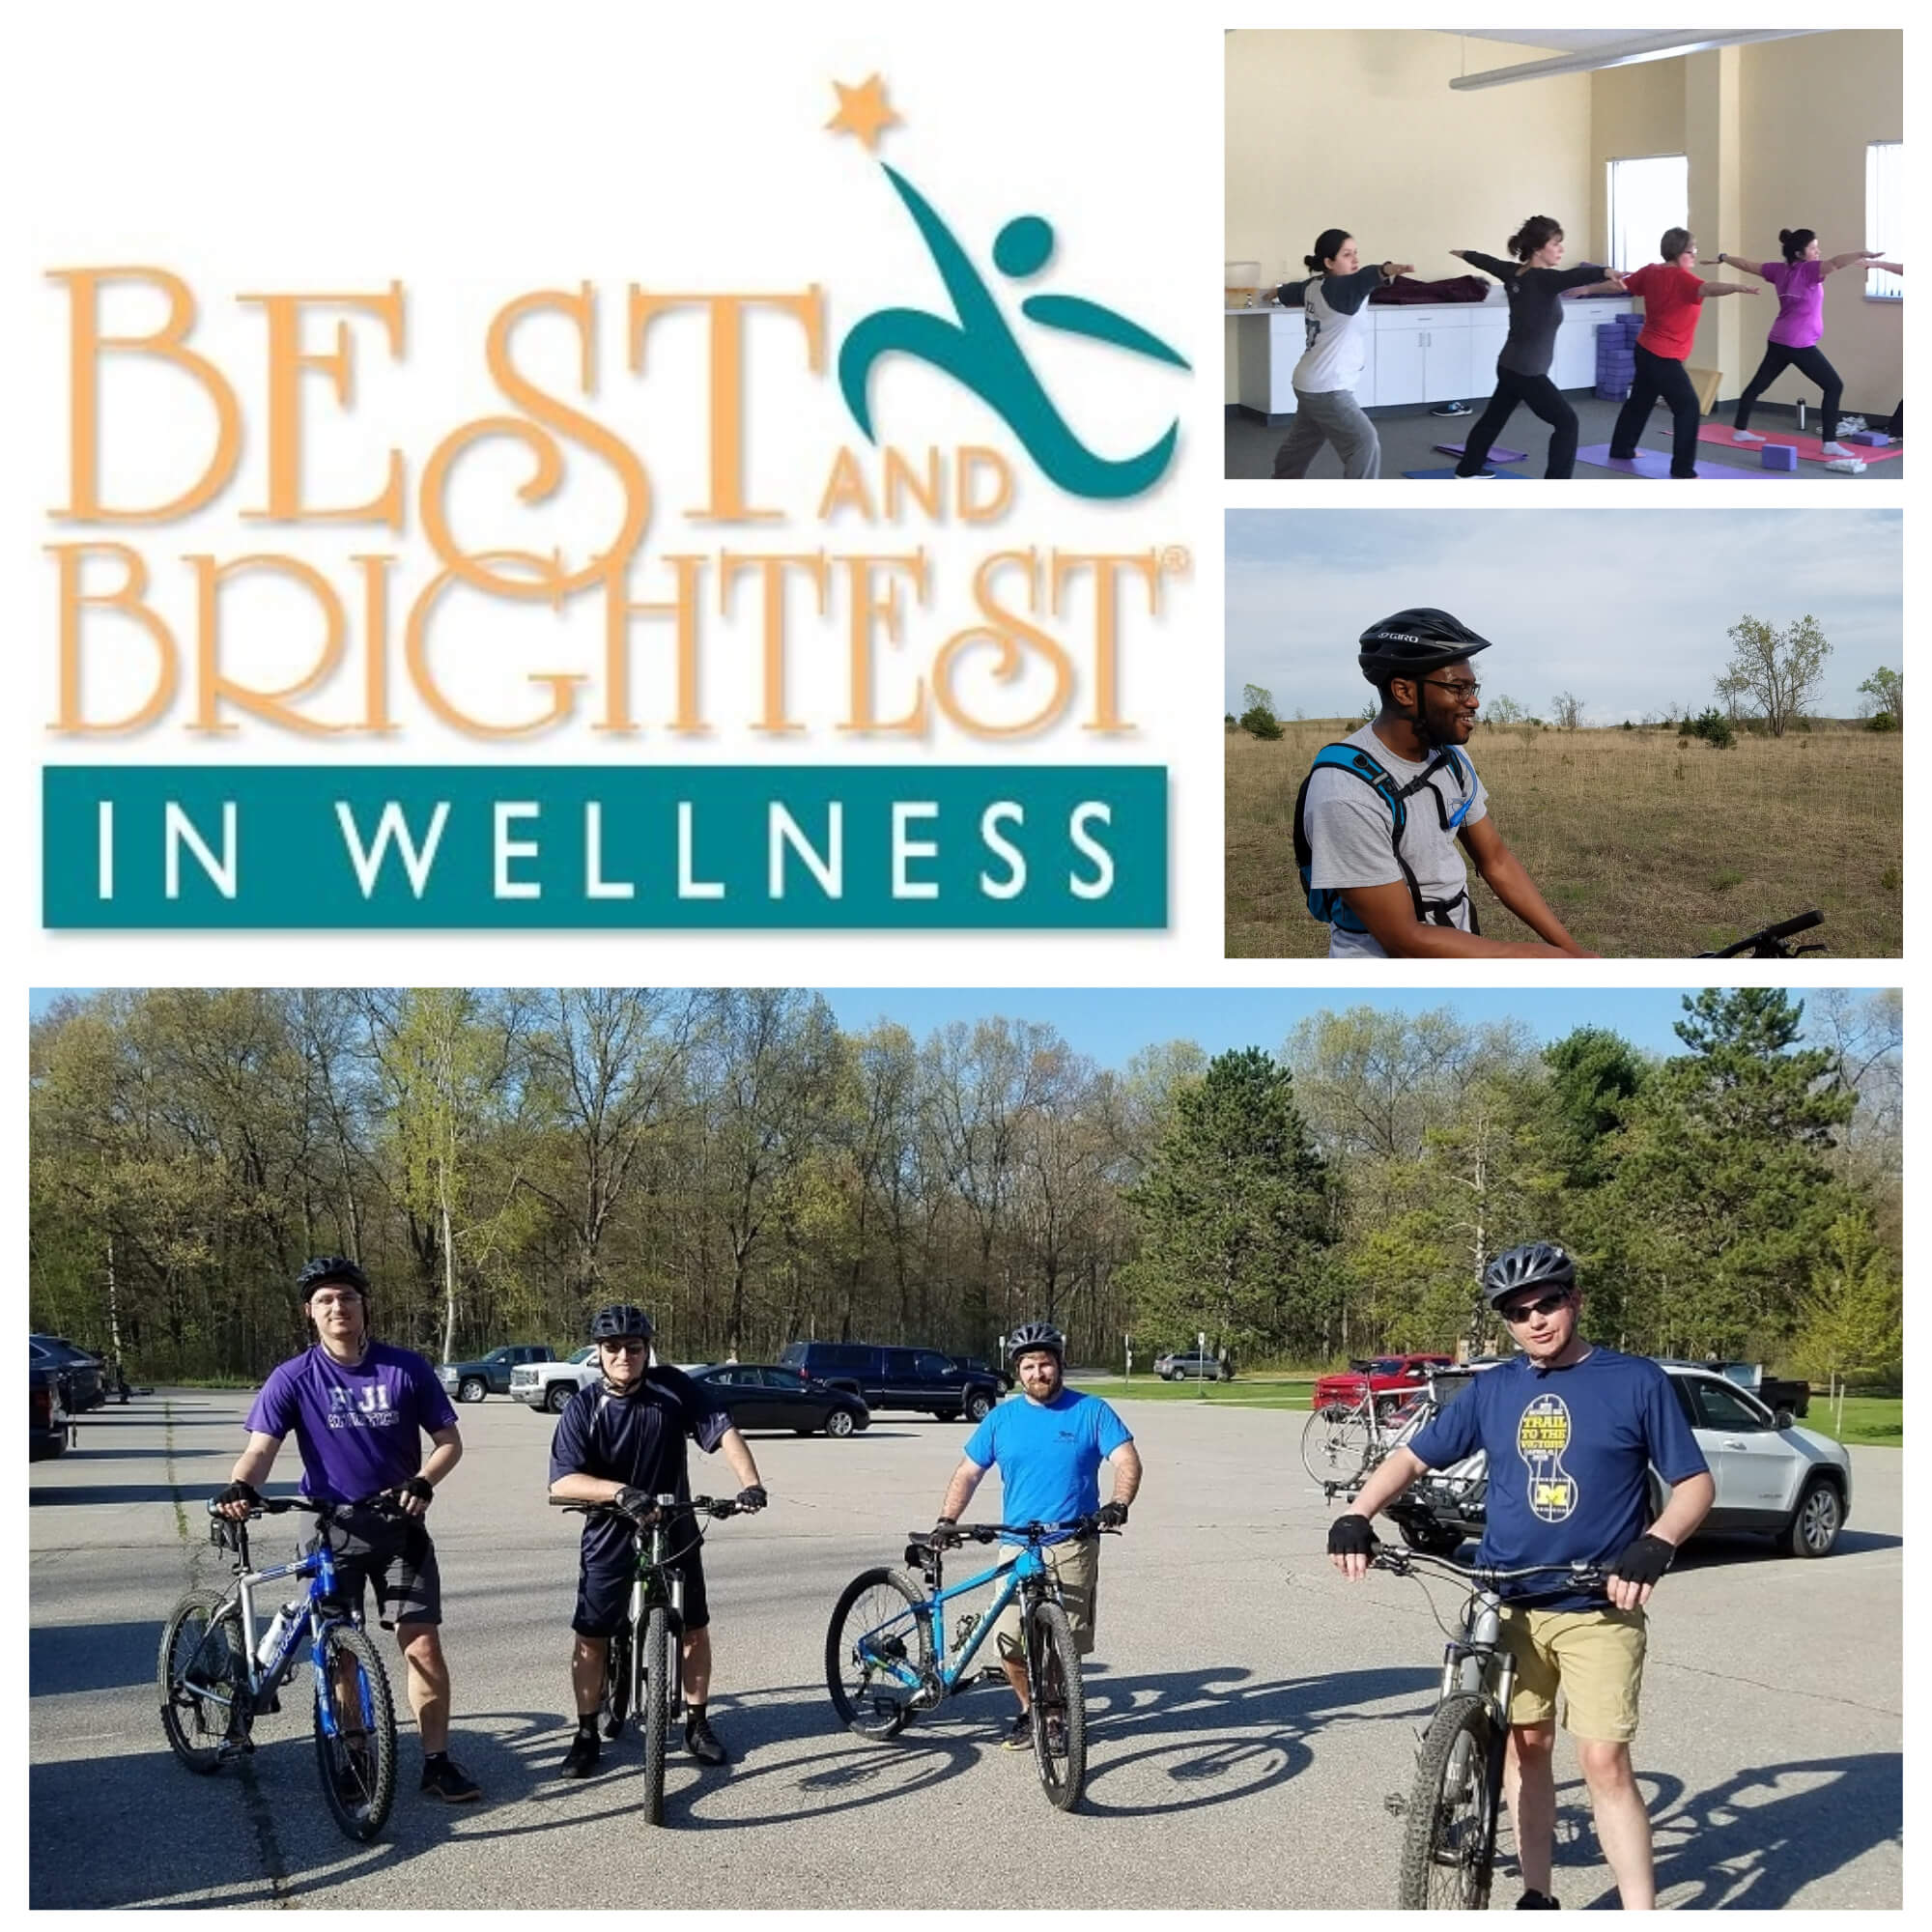 RedViking Named Best And Brightest For Wellness in 2018